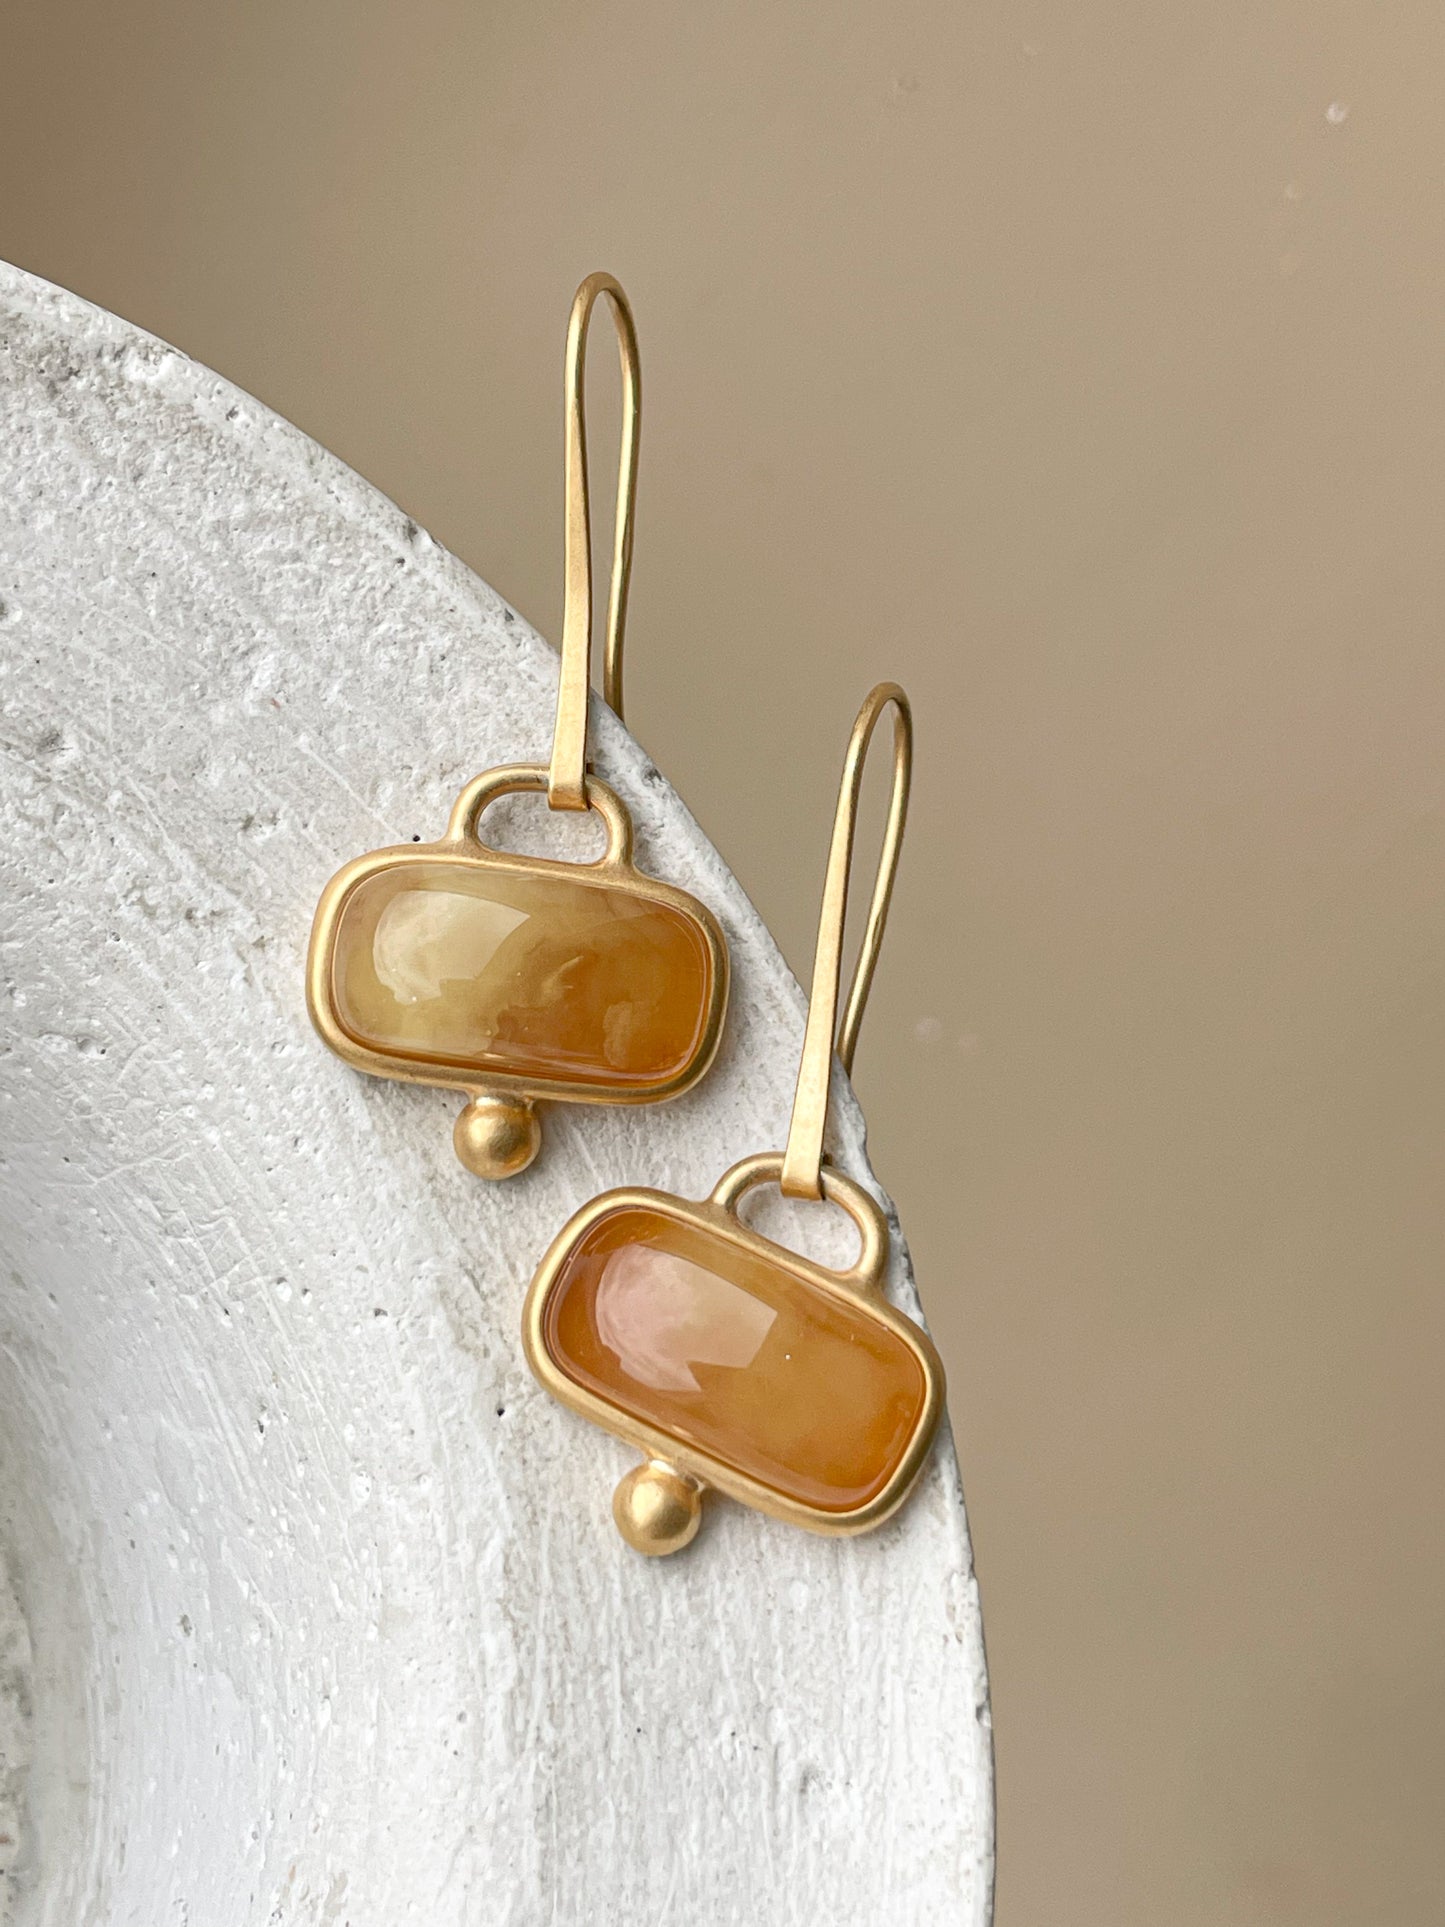 Honey amber dangle earrings - Gold plated silver - Hook earrings collection